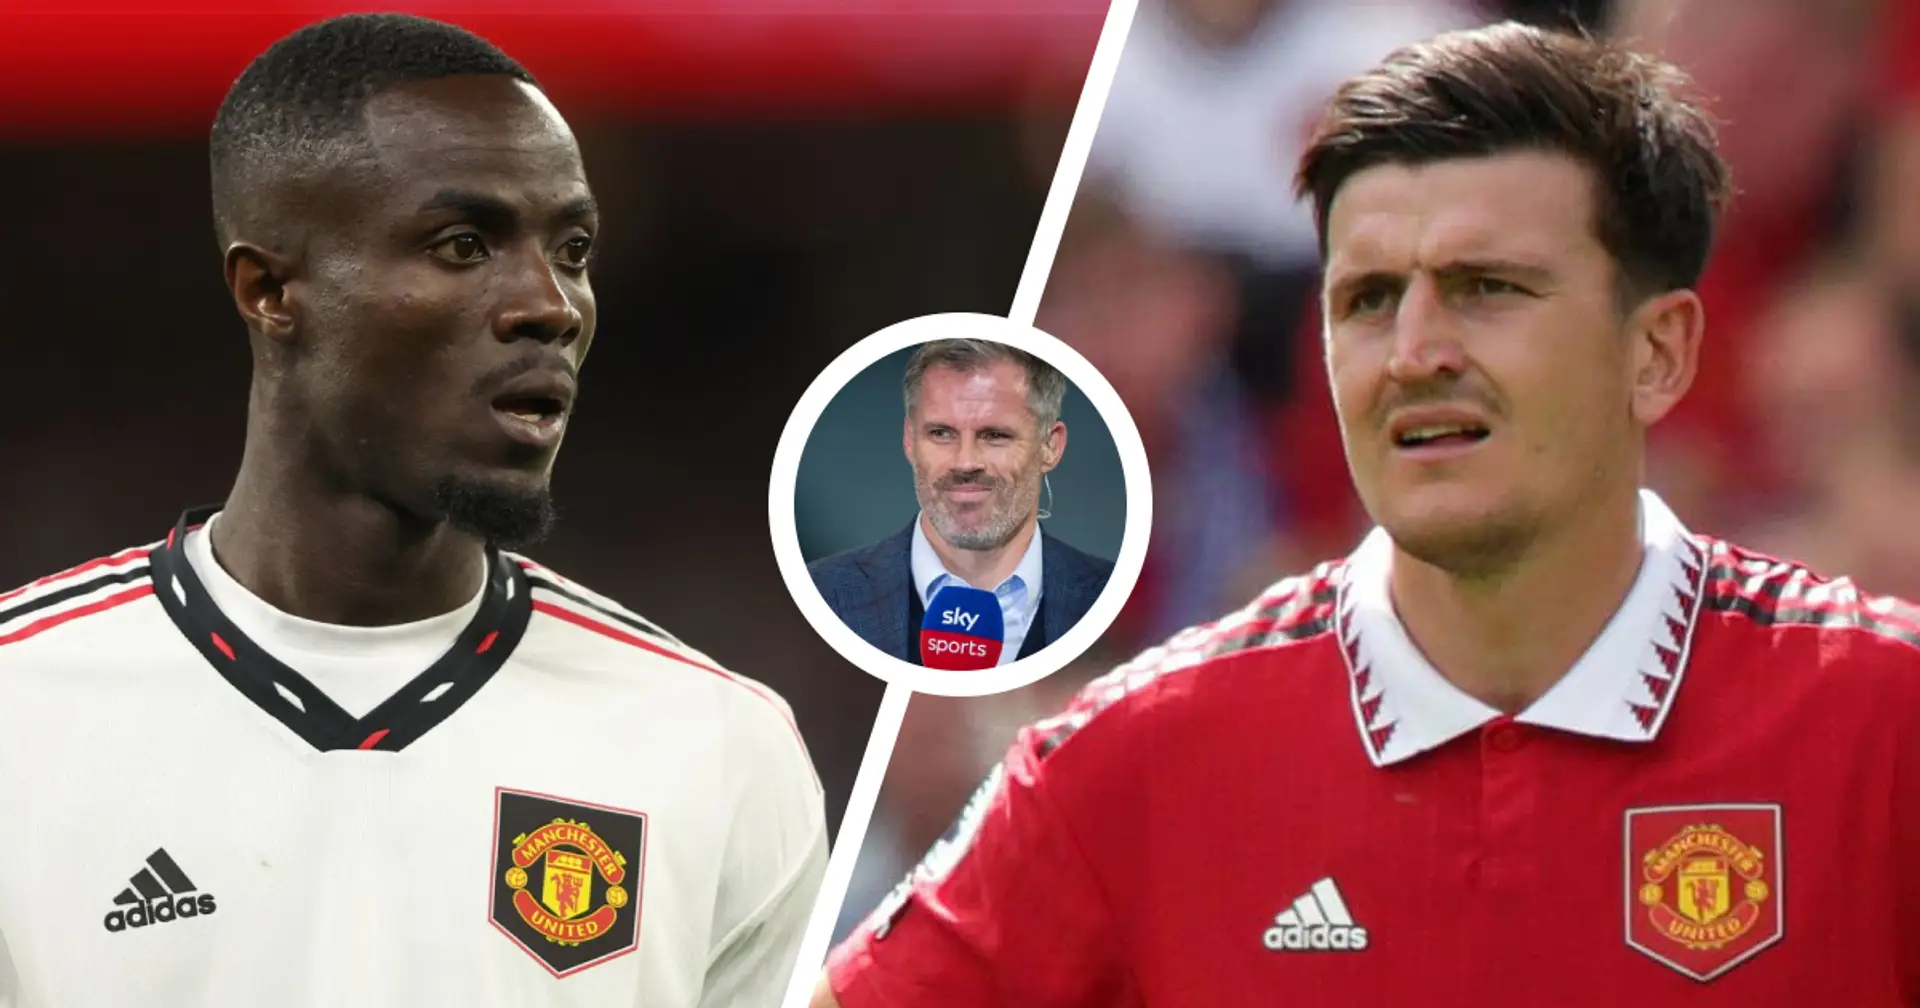 Jamie Carragher: 'Bailly was constantly injured and poor when he played. Maguire is better' 